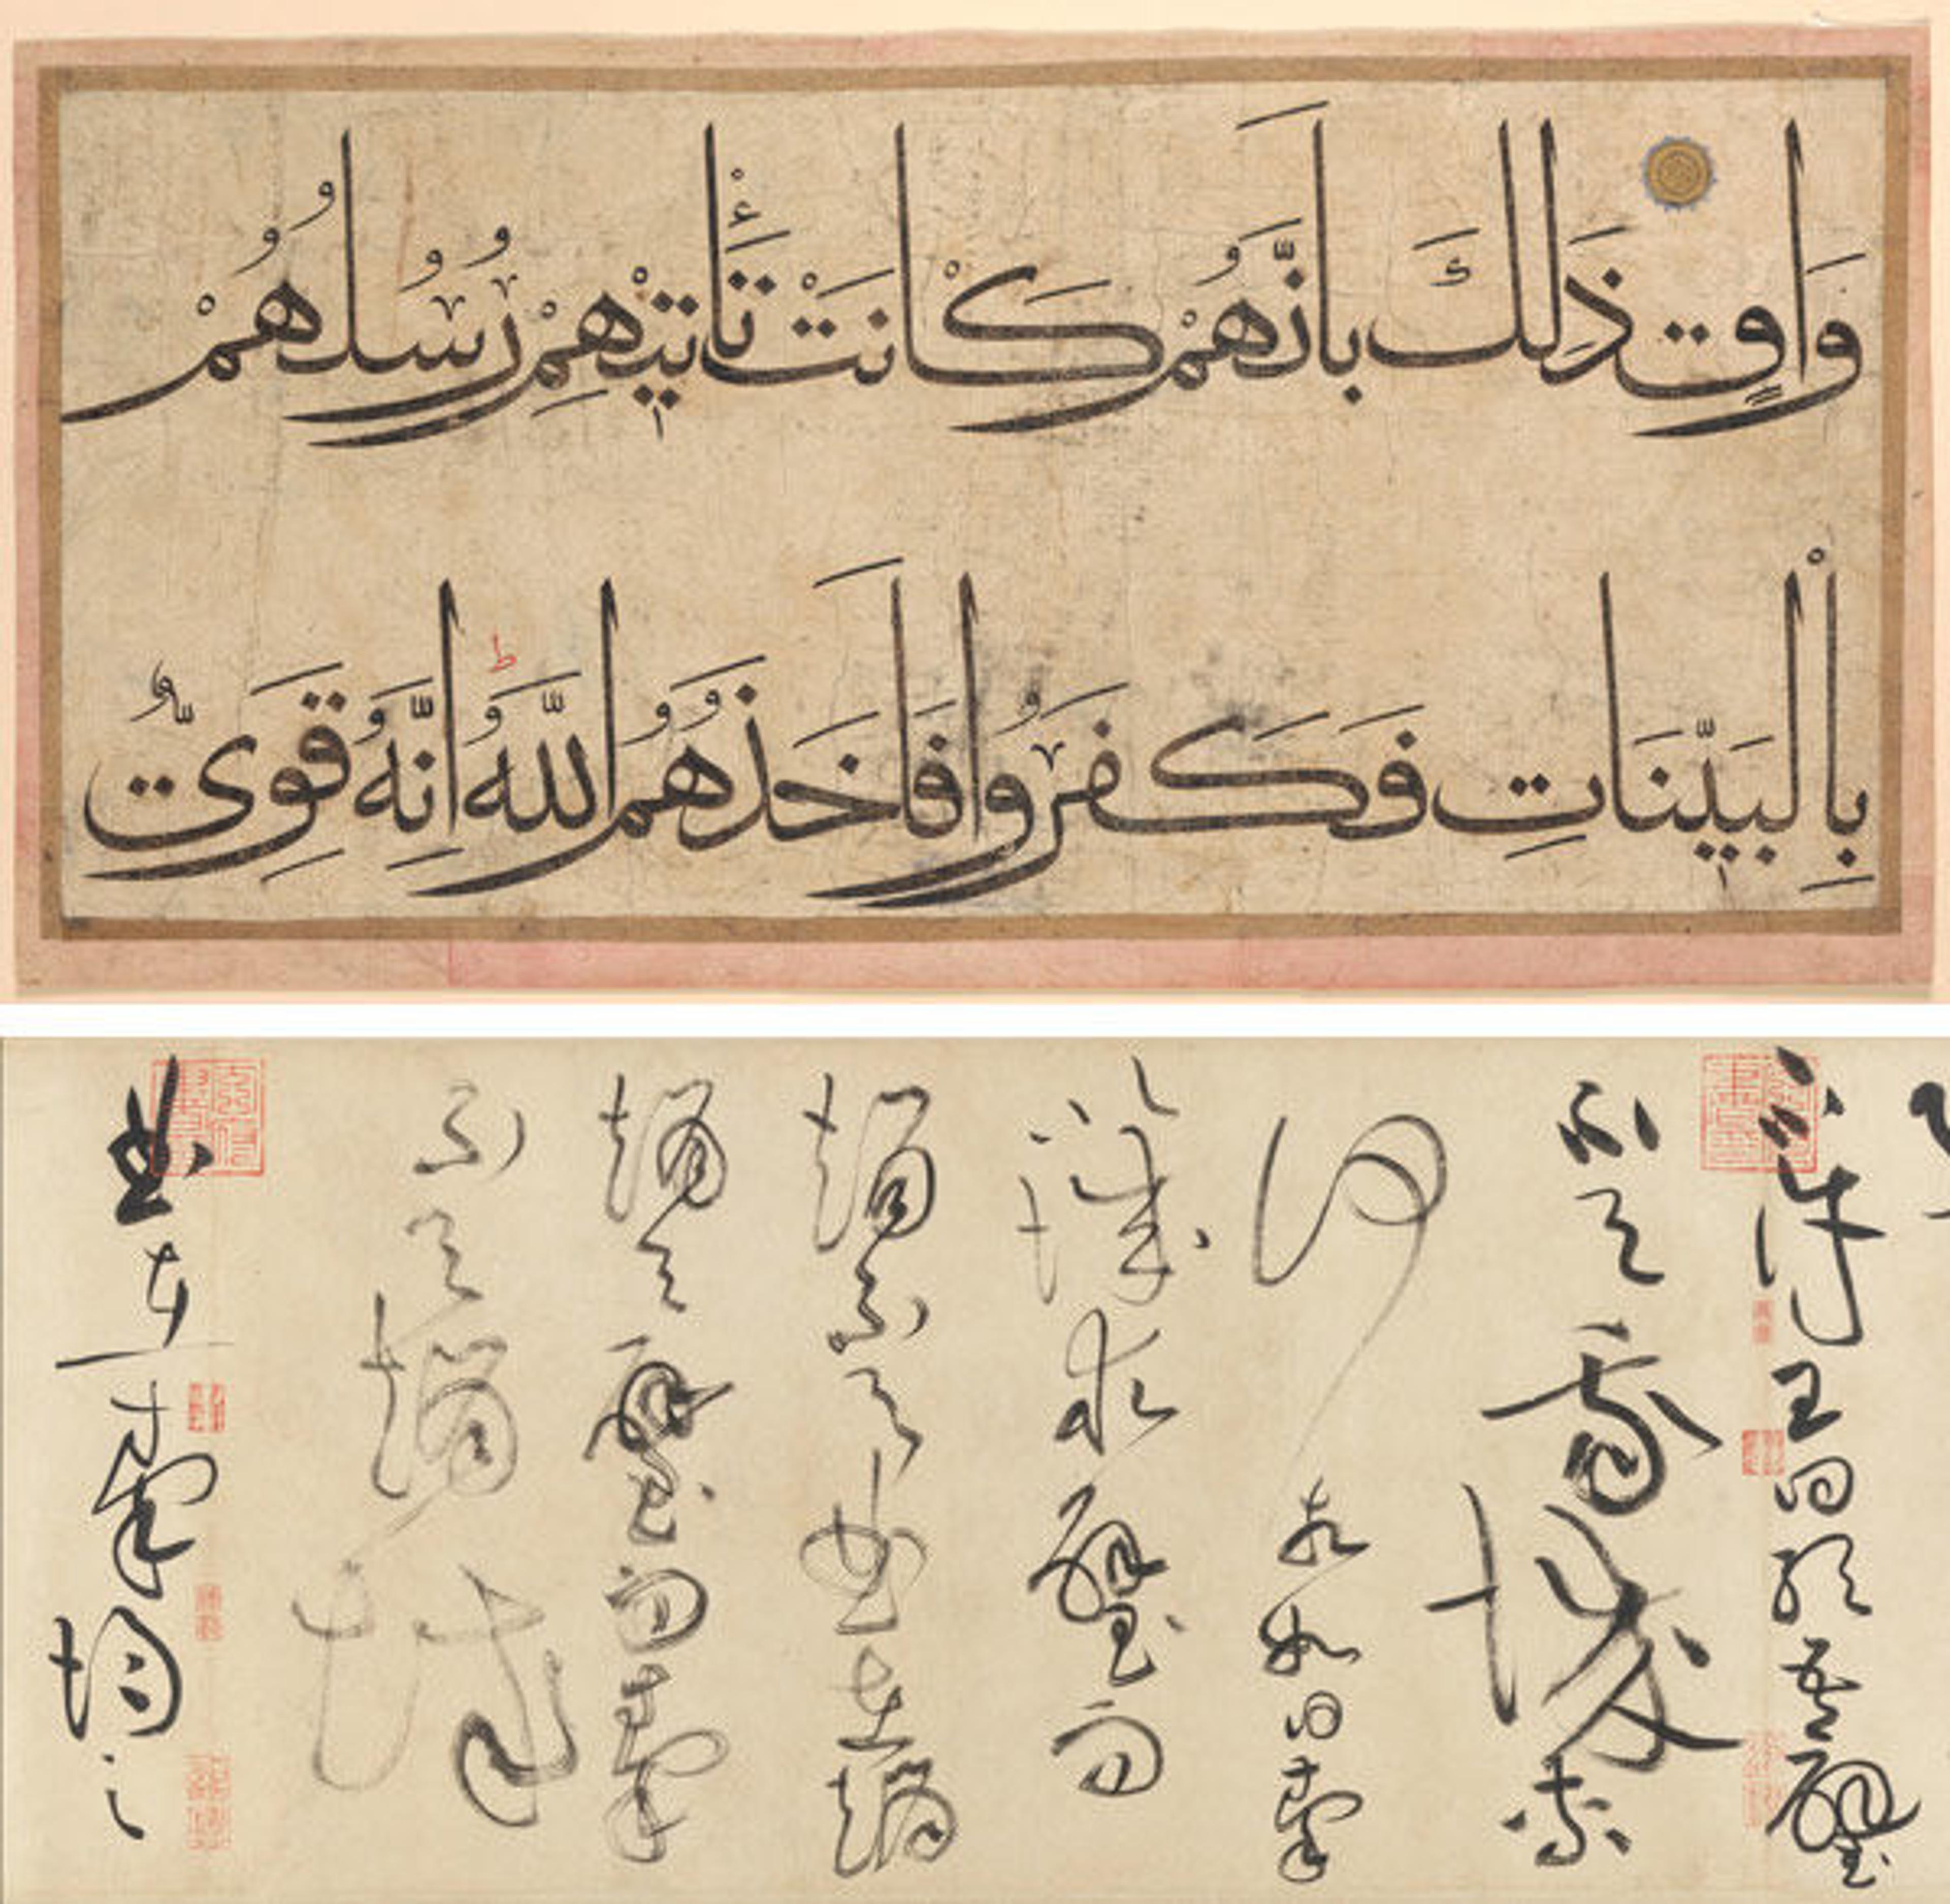 Top: Section of a Qur'an manuscript, late 14th–early 15th century. Copied by 'Umar Aqta.' Present-day Uzbekistan, probably Samarqand. Islamic. Ink, opaque watercolor, and gold on paper. The Metropolitan Museum of Art, New York, Anonymous Gift, 1972 (1972.279). Bottom: Huang Tingjian (Chinese, 1045–1105). Biographies of Lian Po and Lin Xiangru, ca. 1095. China. Handscroll; ink on paper. The Metropolitan Museum of Art, New York. Bequest of John M. Crawford Jr., 1988 (1989.363.4)